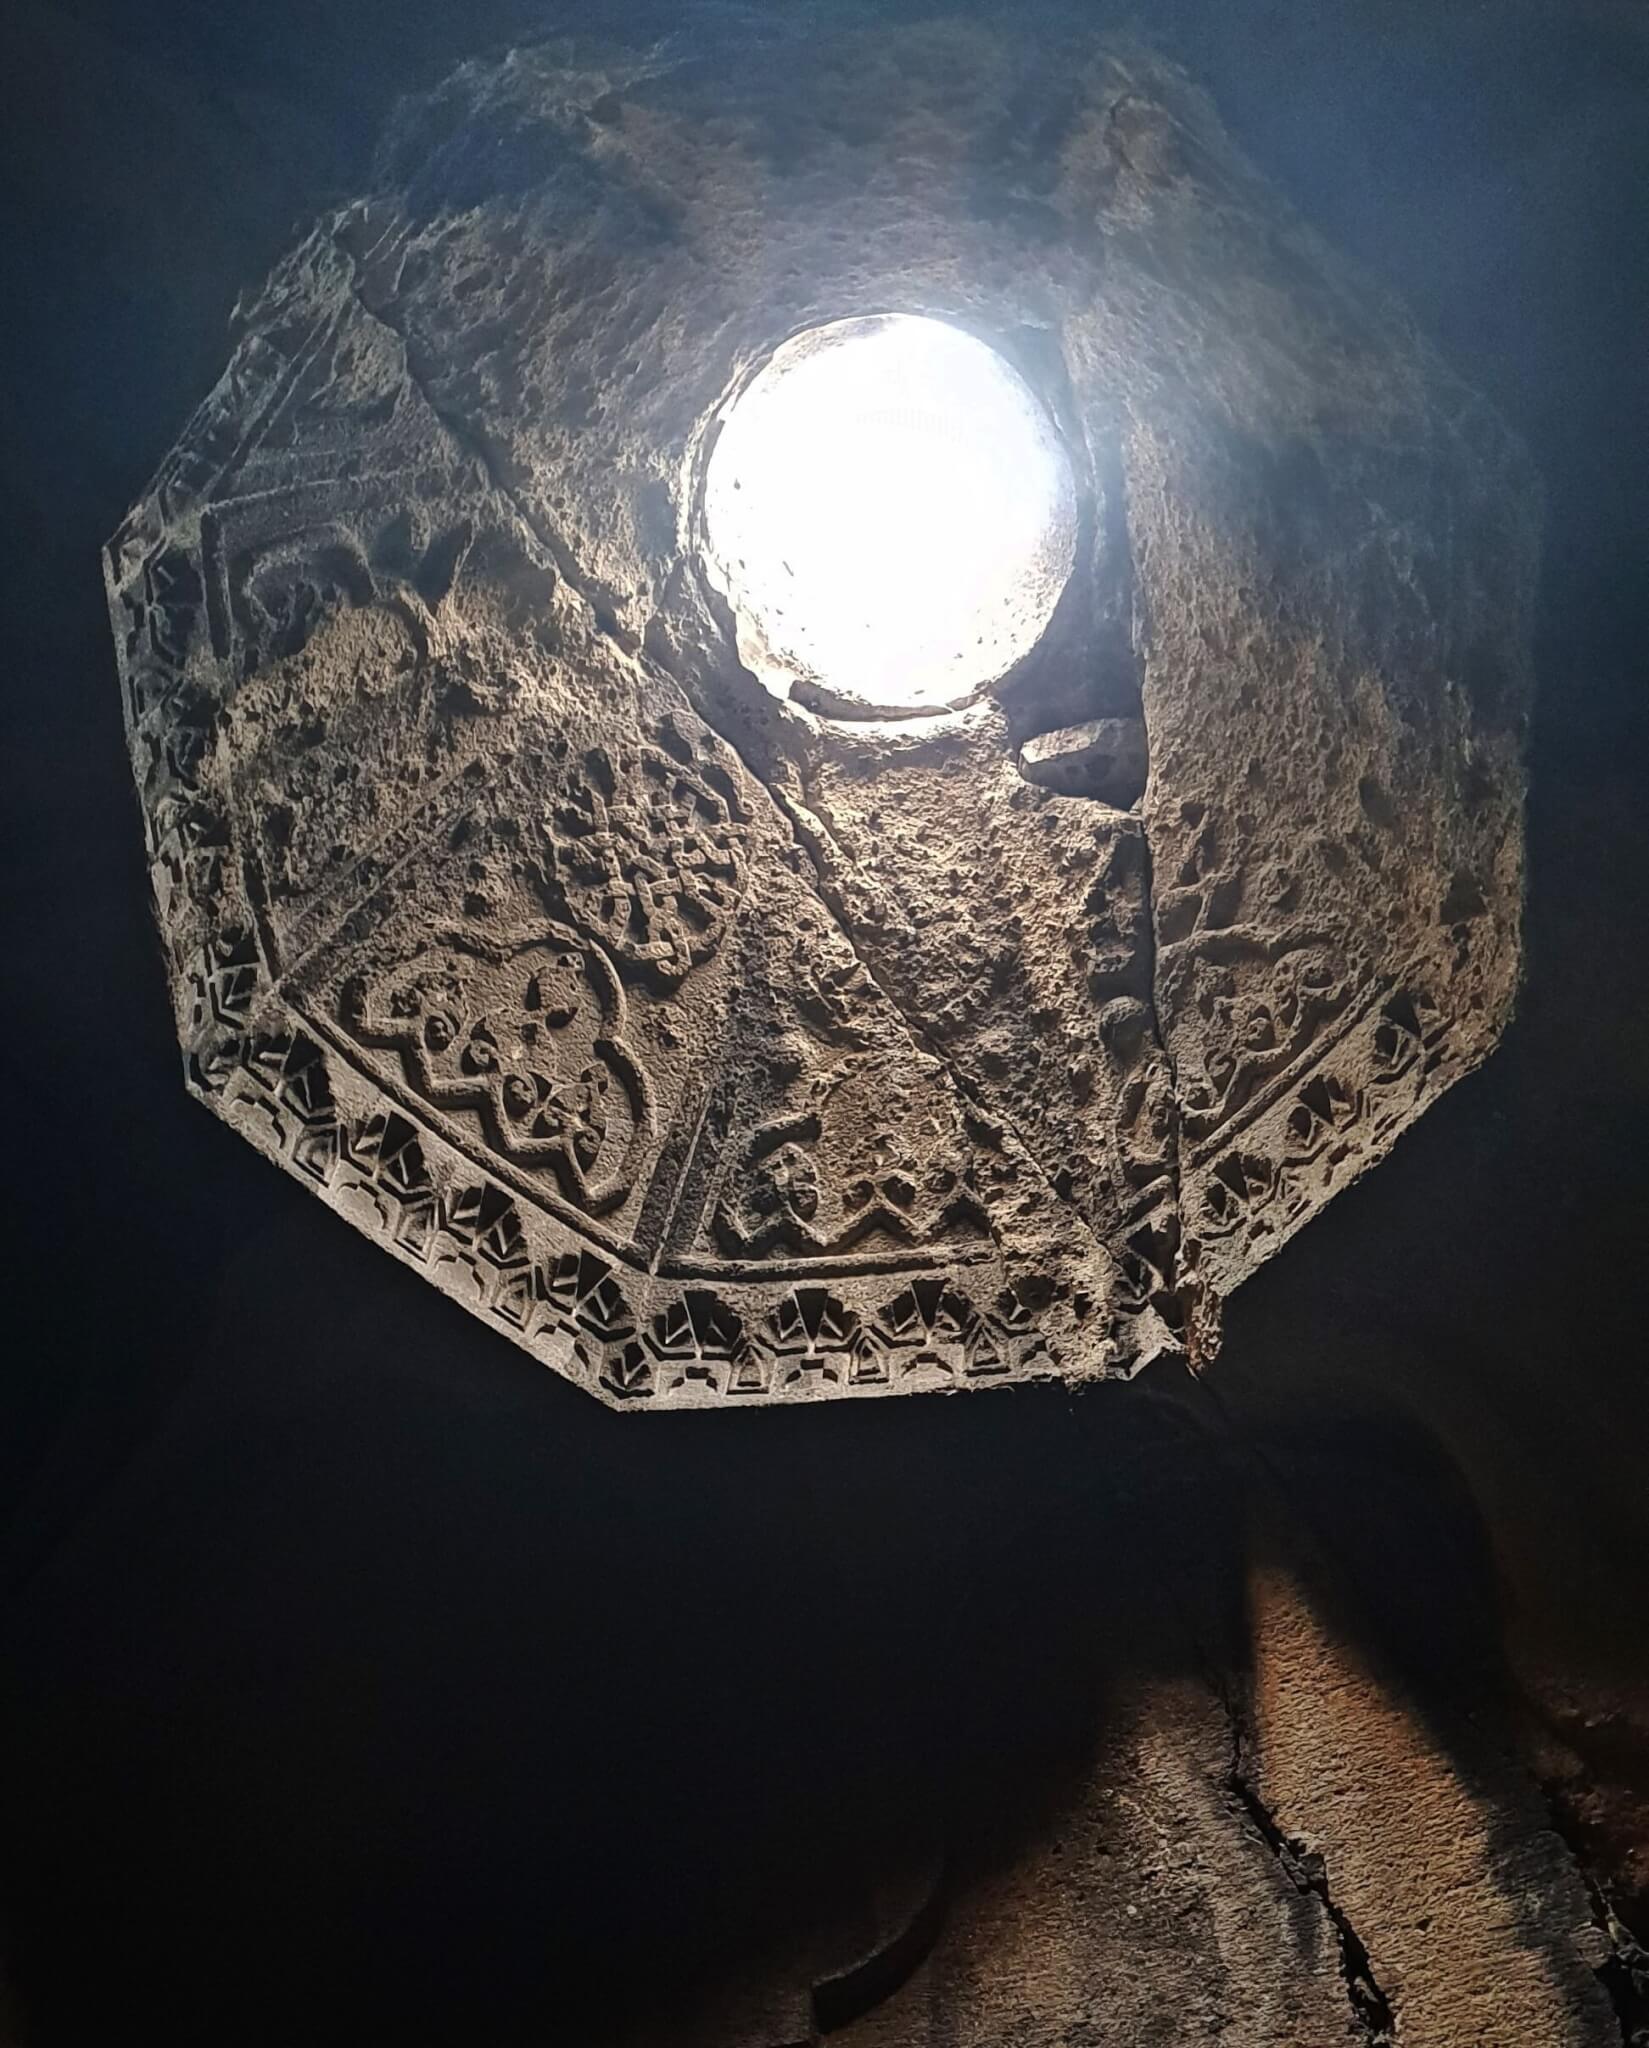 Circular Cupola to let the light in the cave church